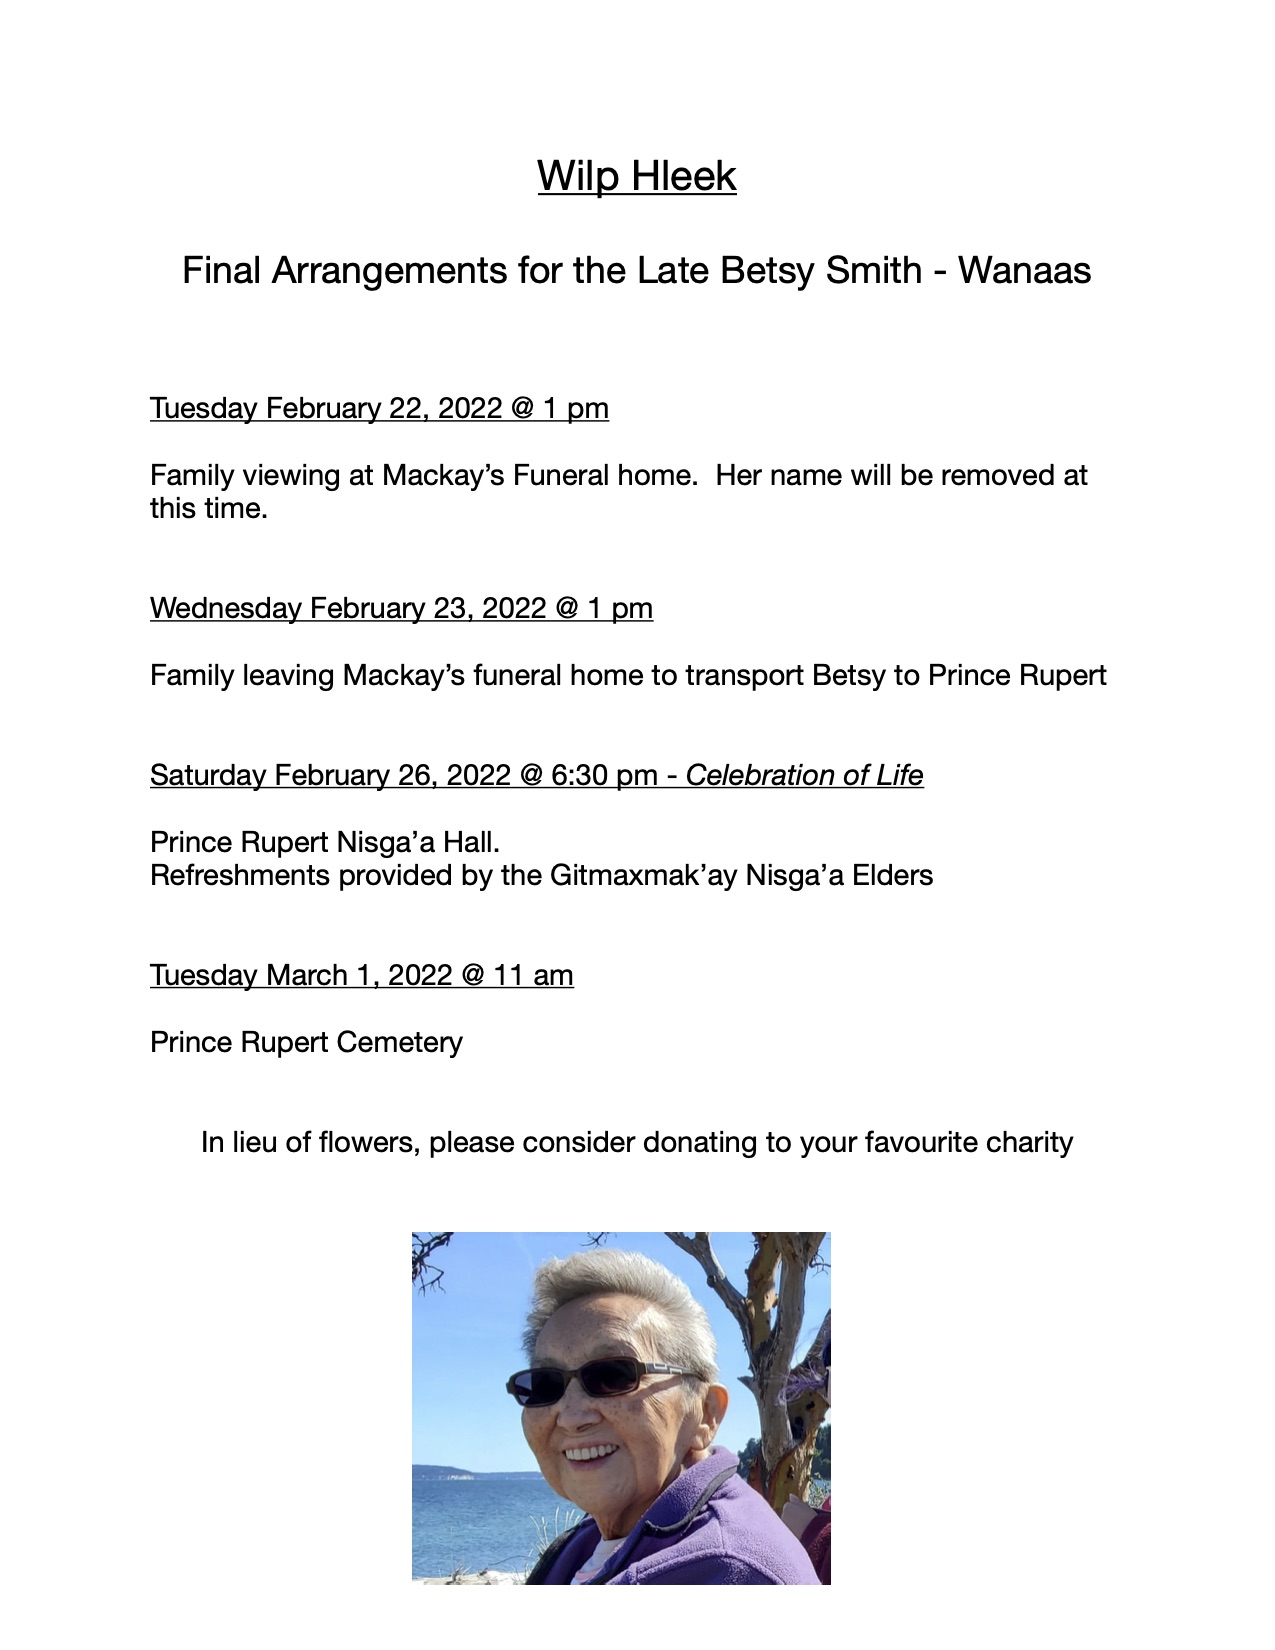 Wilp Hleek | Final Arrangements for the Late Betsy Smith - Wanaas.